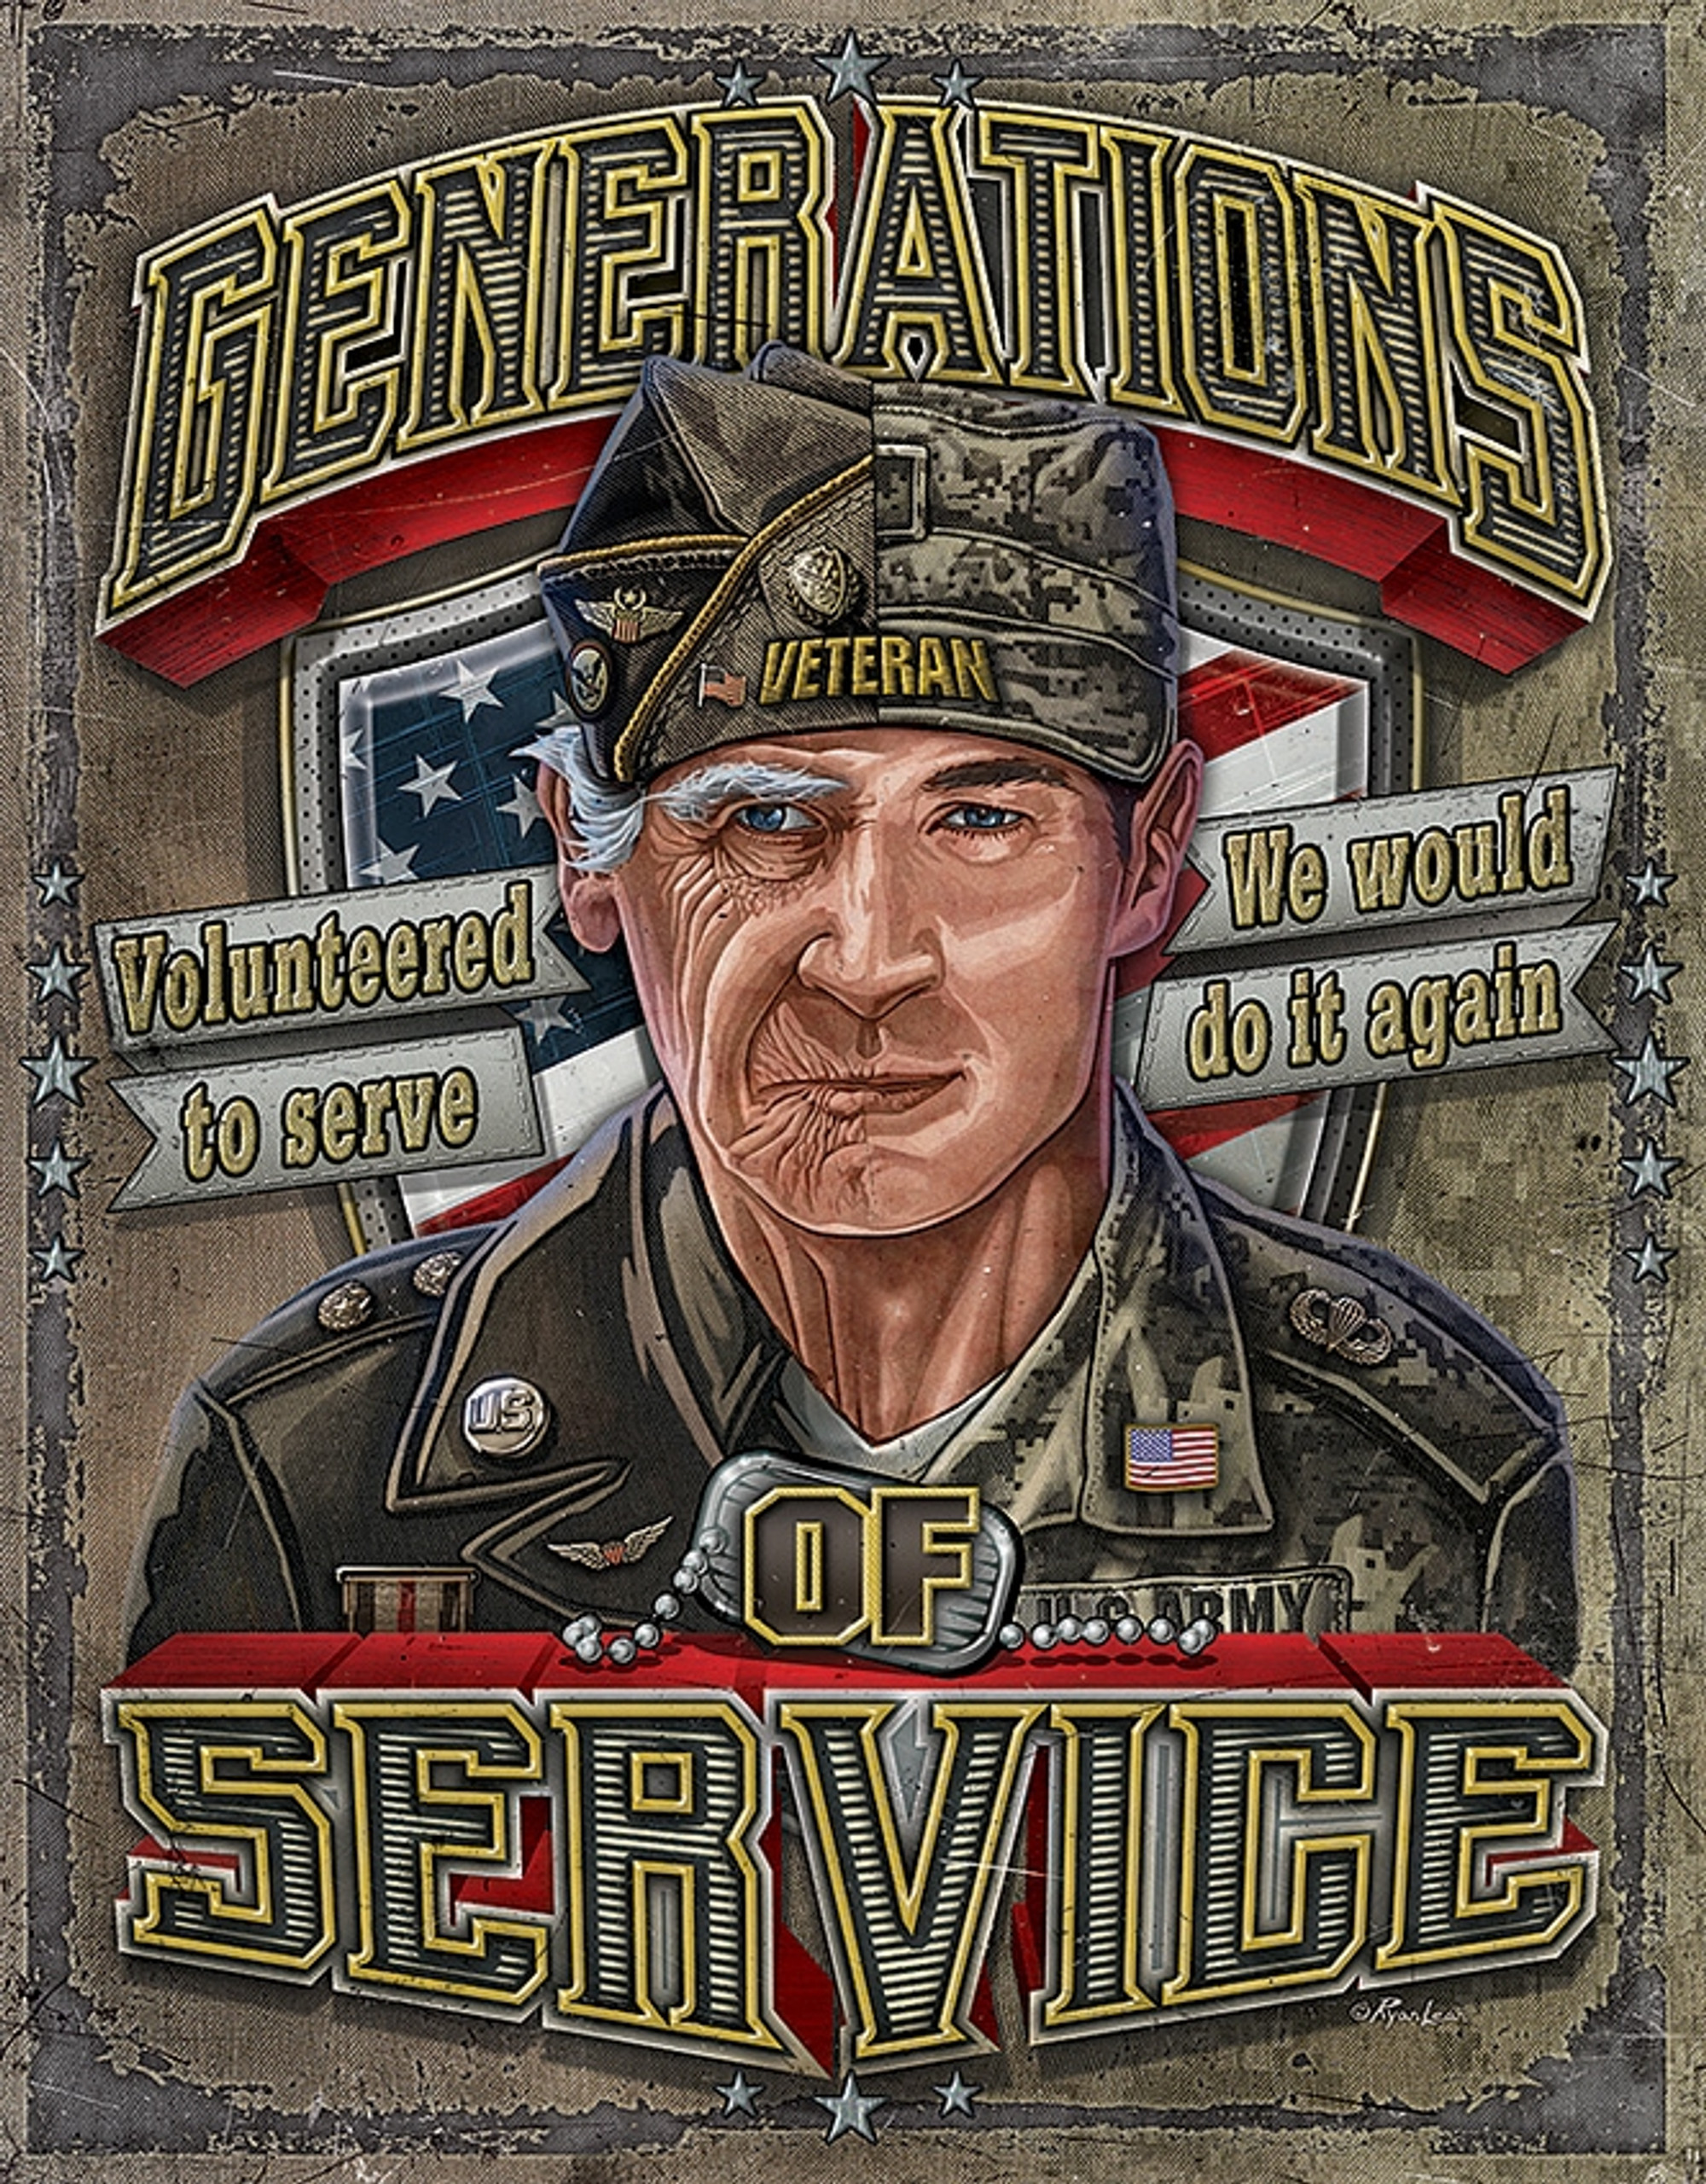 Generations of Service